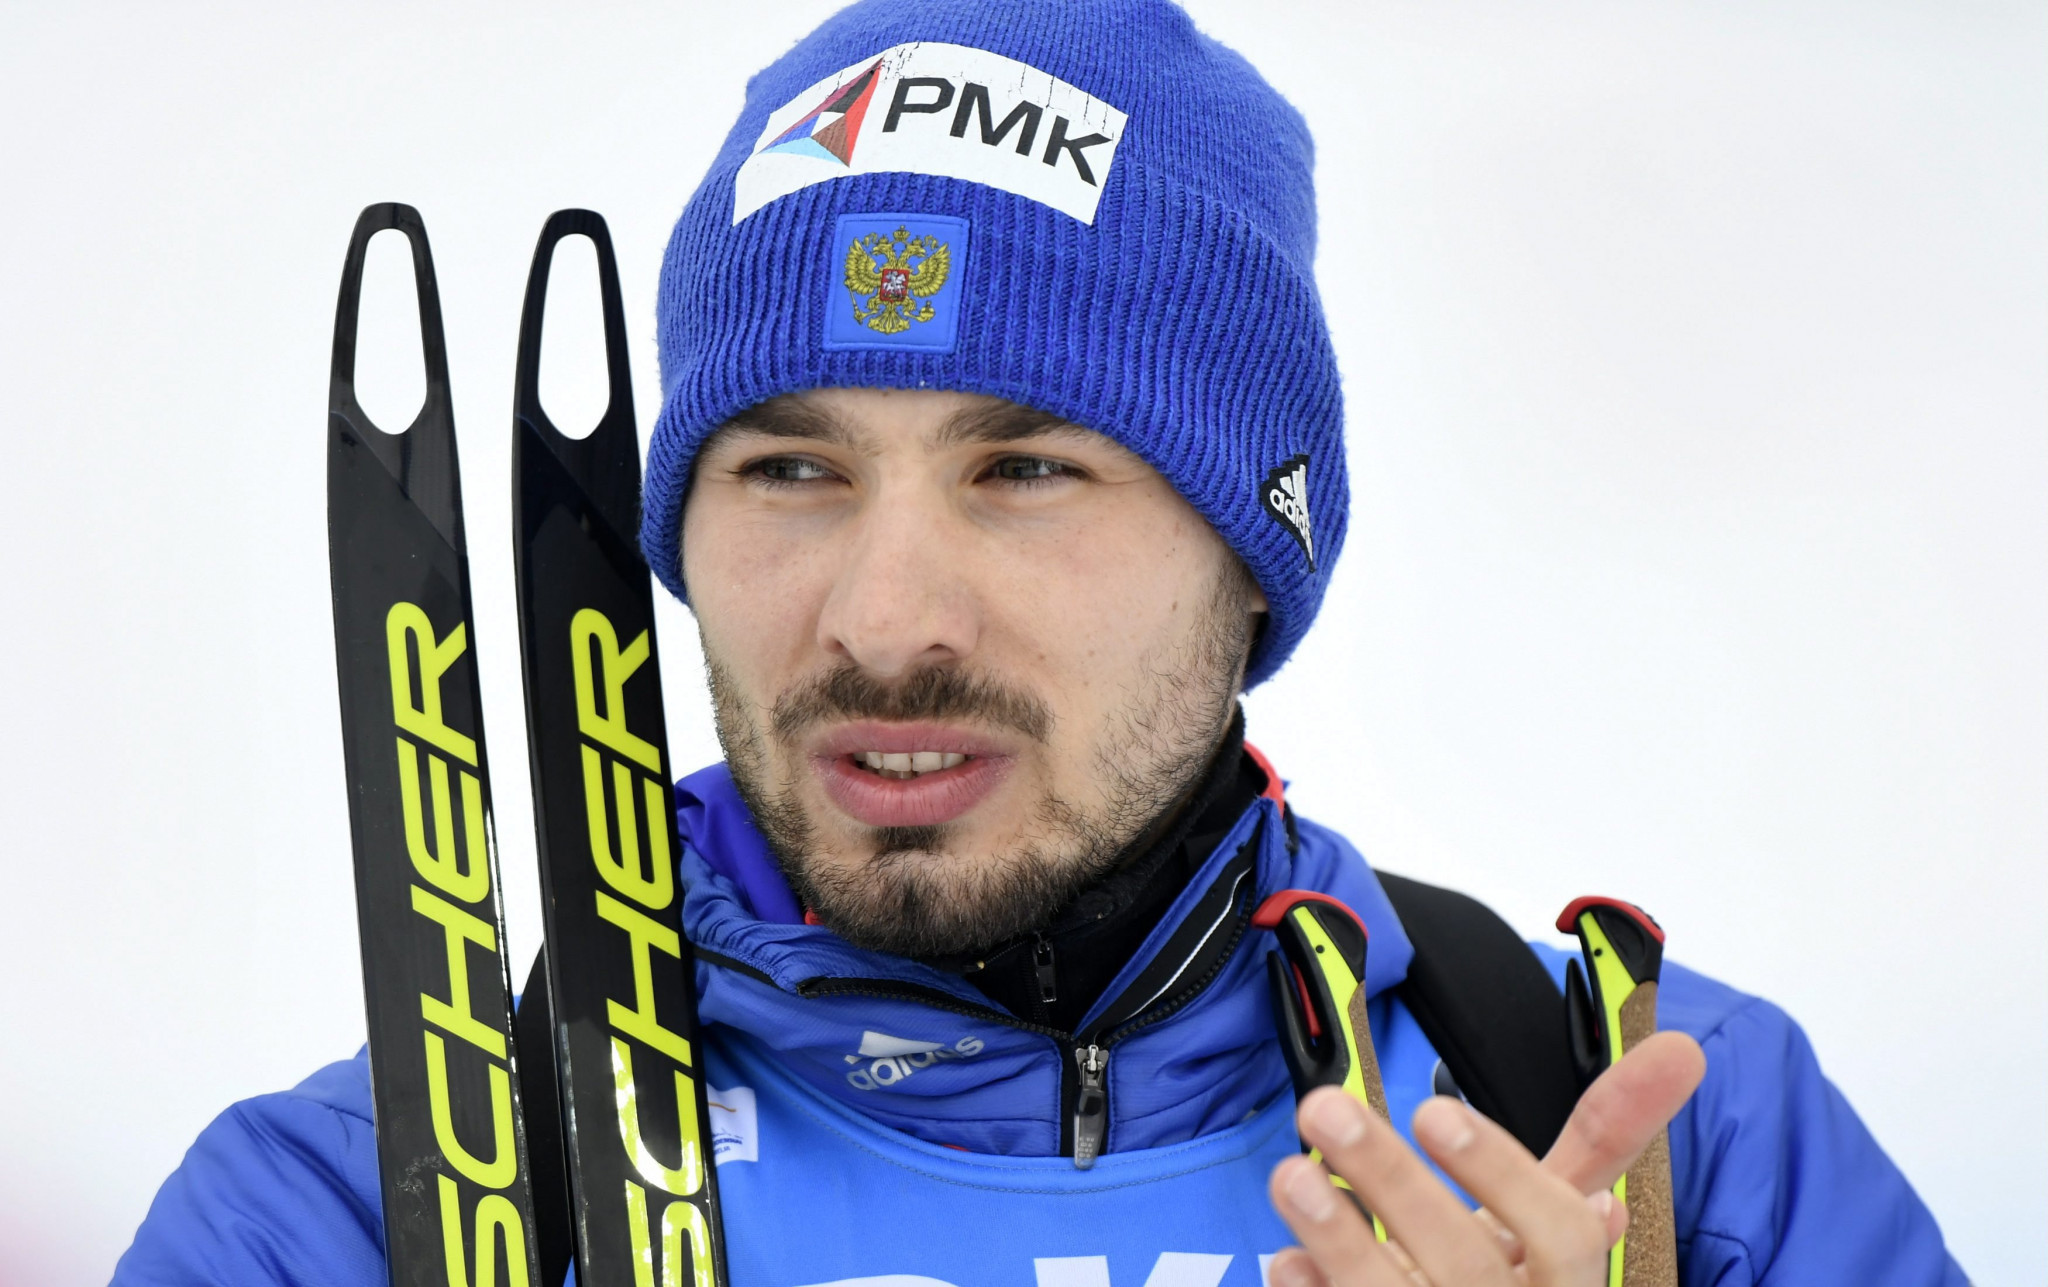 Russian biathlete Anton Shipulin has announced his retirement from the sport ©Getty Images